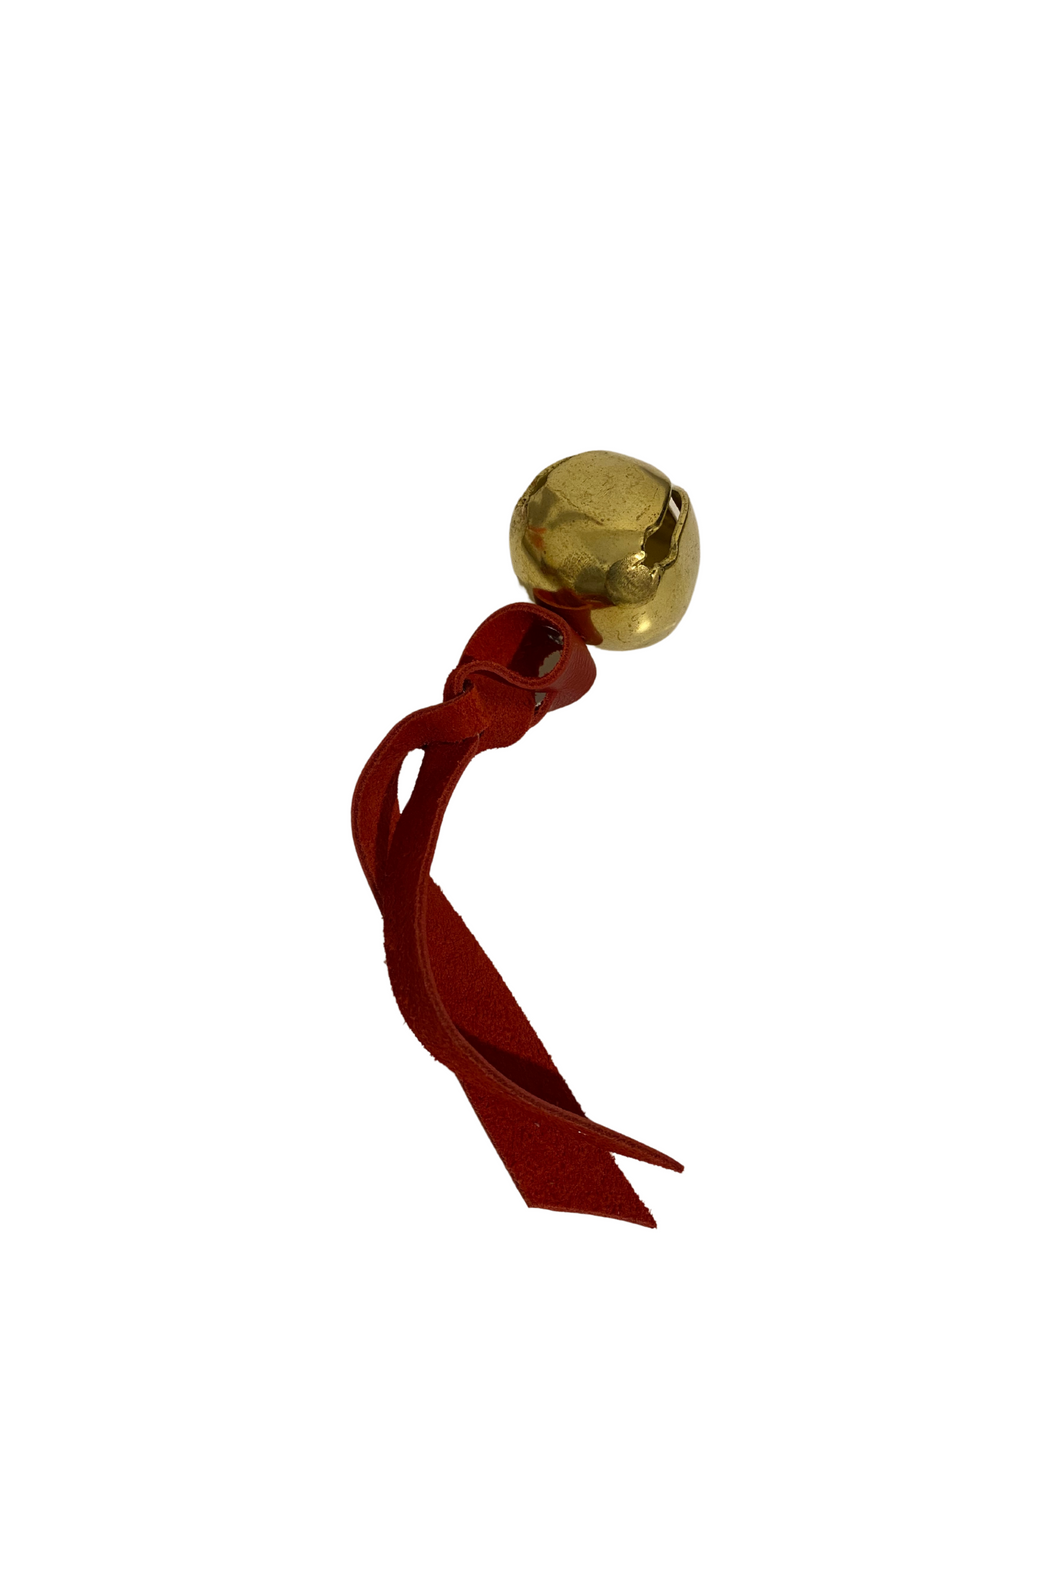 Brass bell with red leather strap